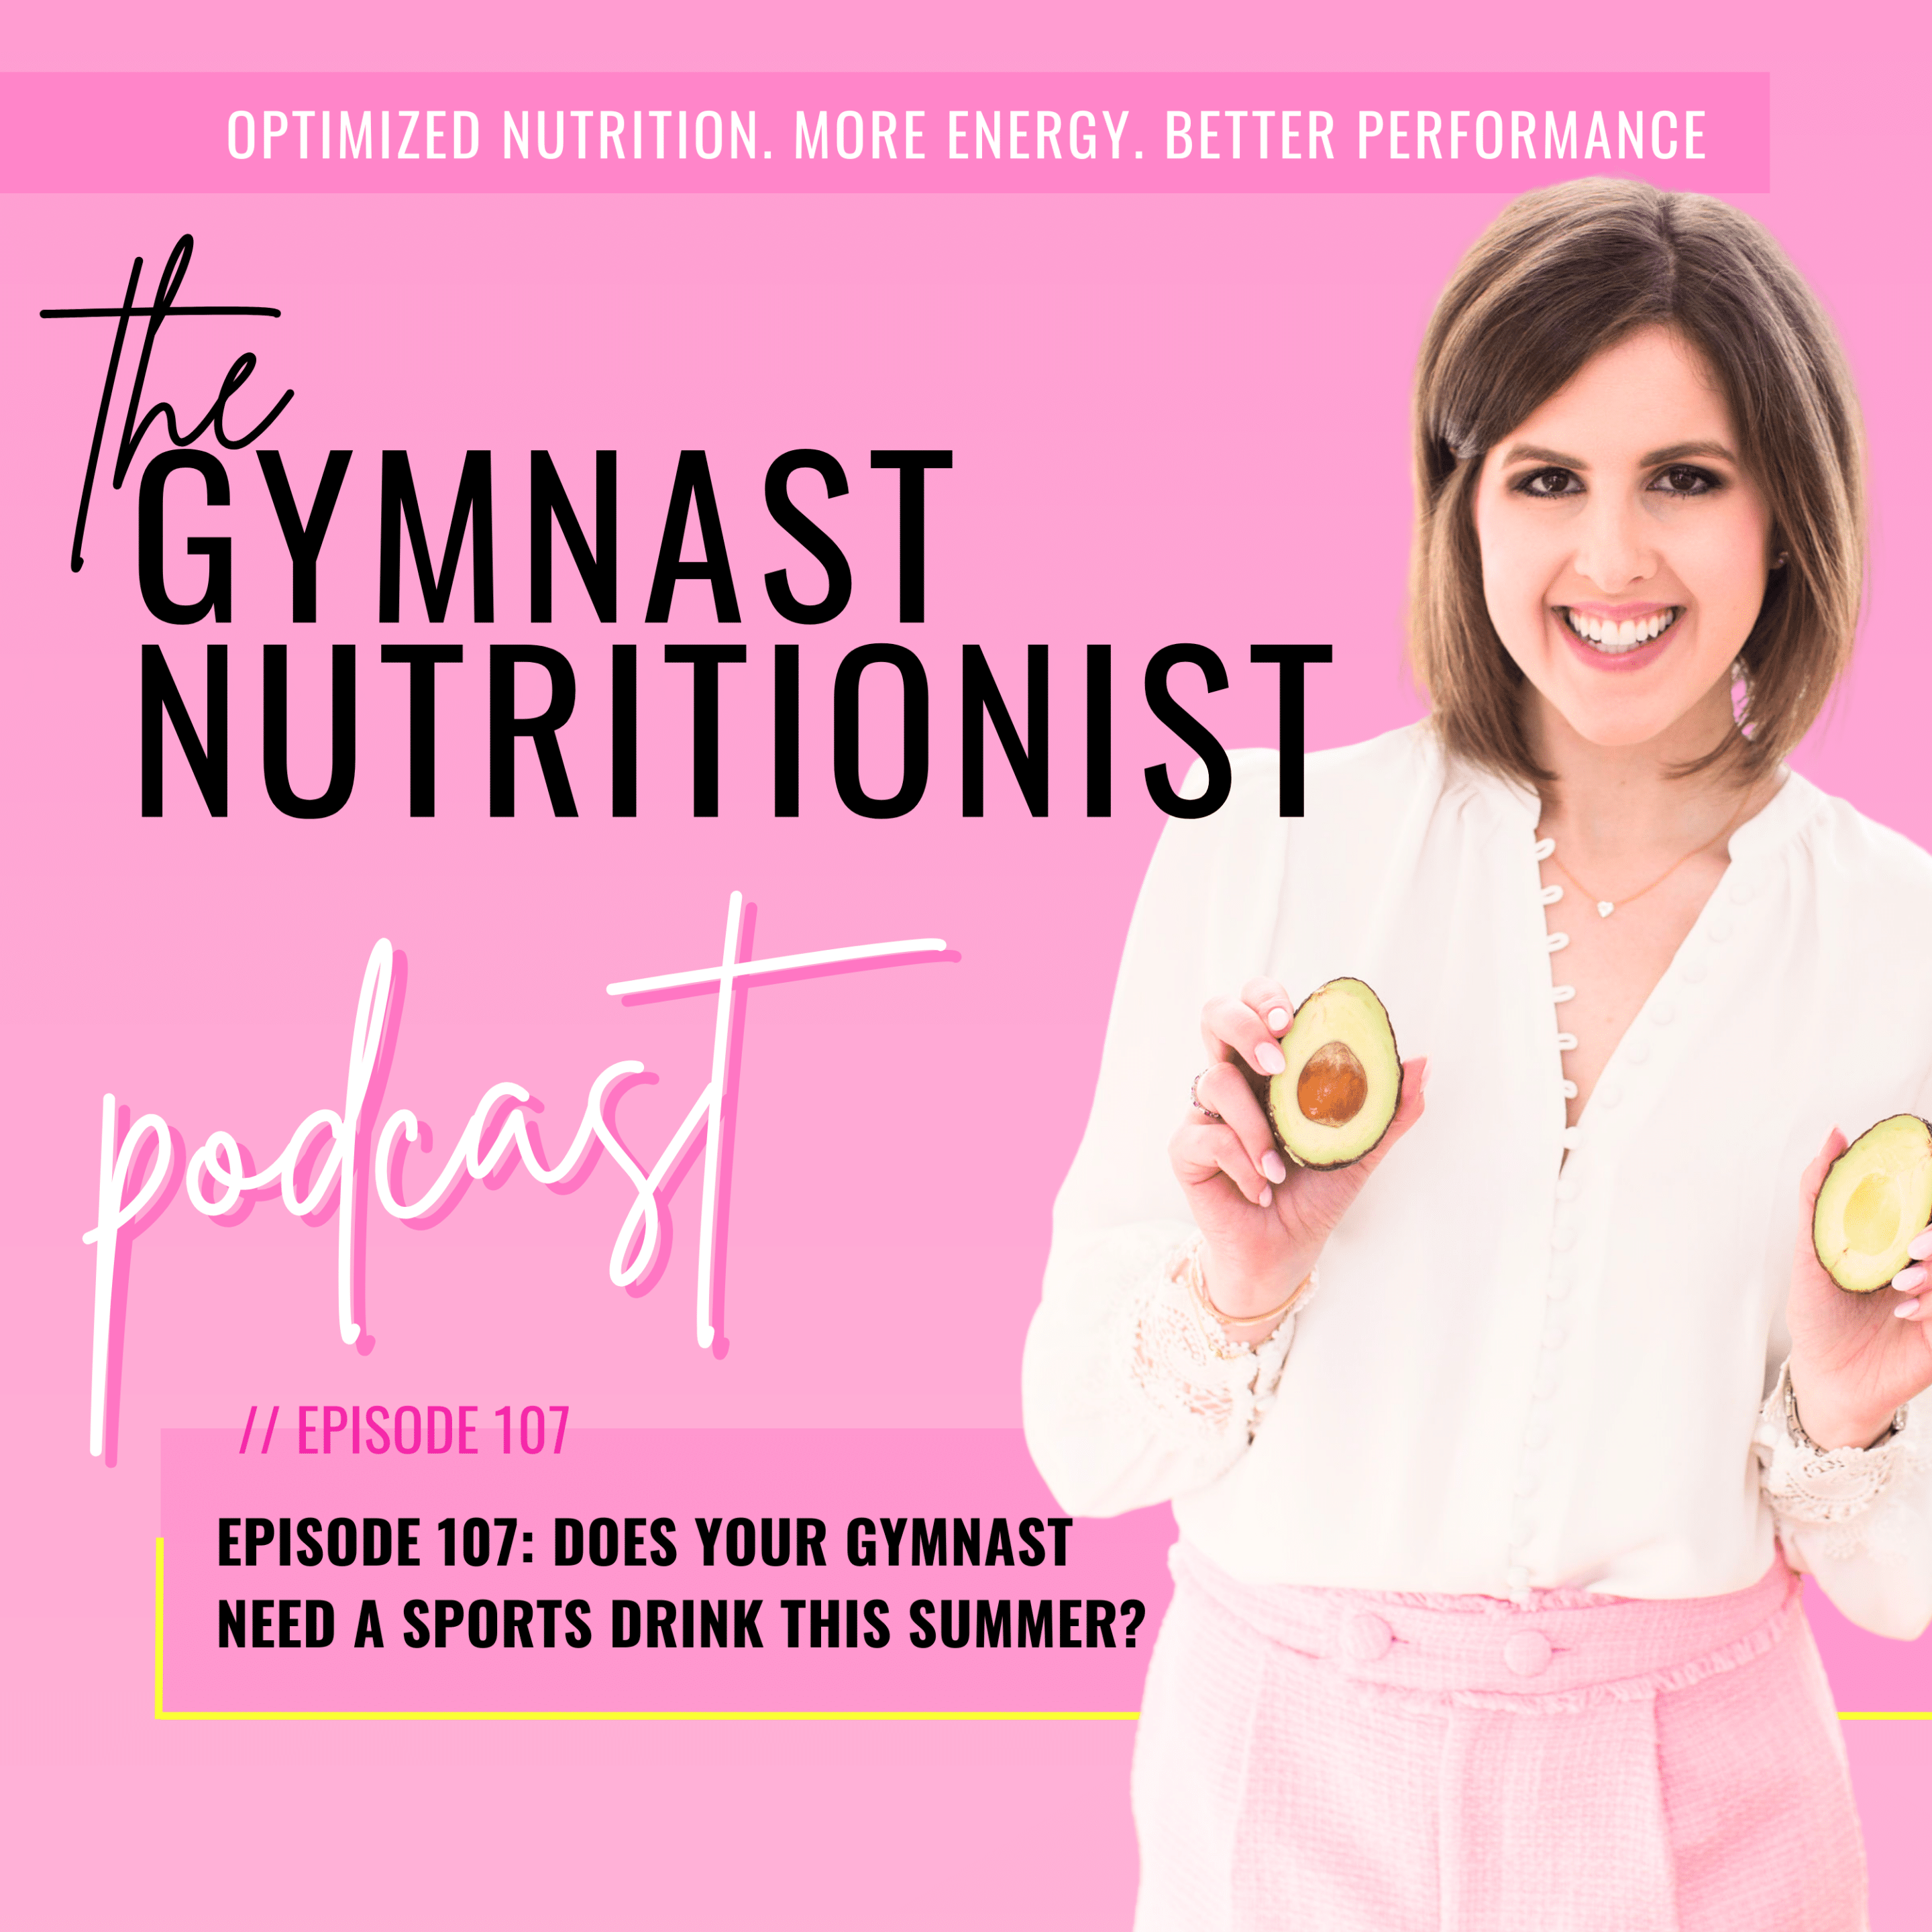 Episode 107 Does your gymnast need a sports drink this summer